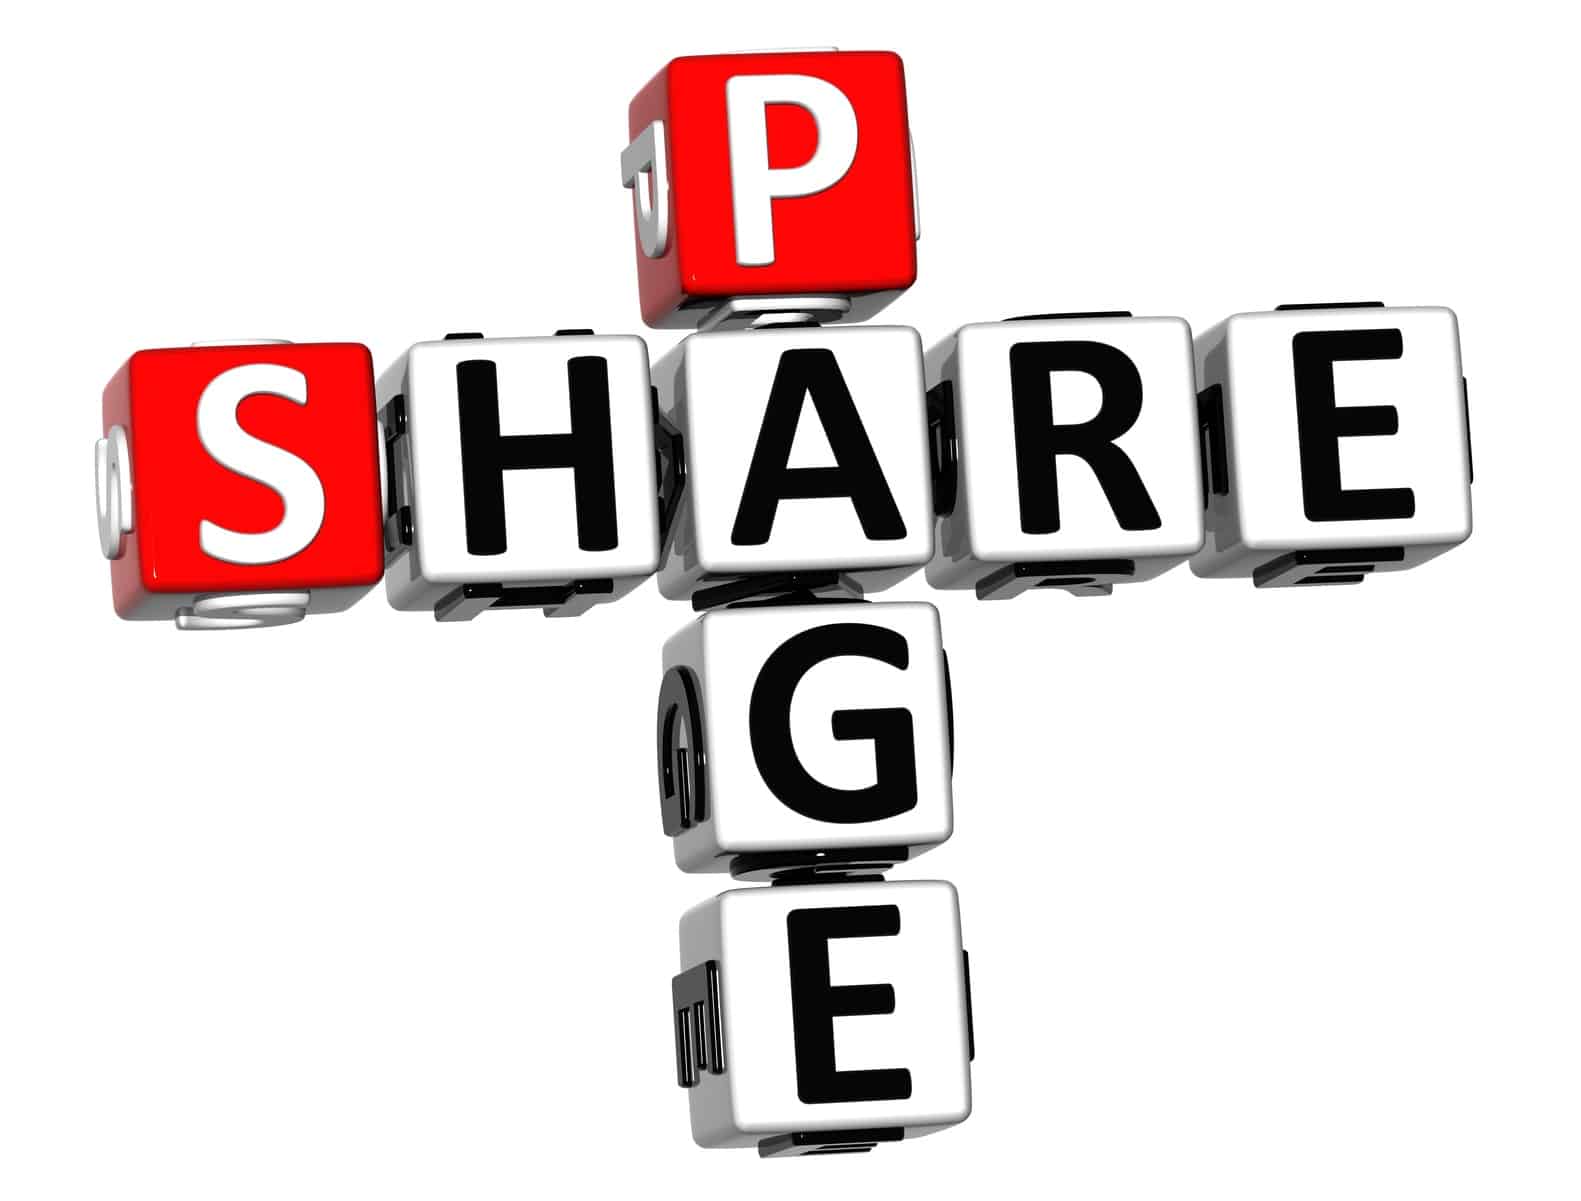 Three Things to Know about Sharing Content